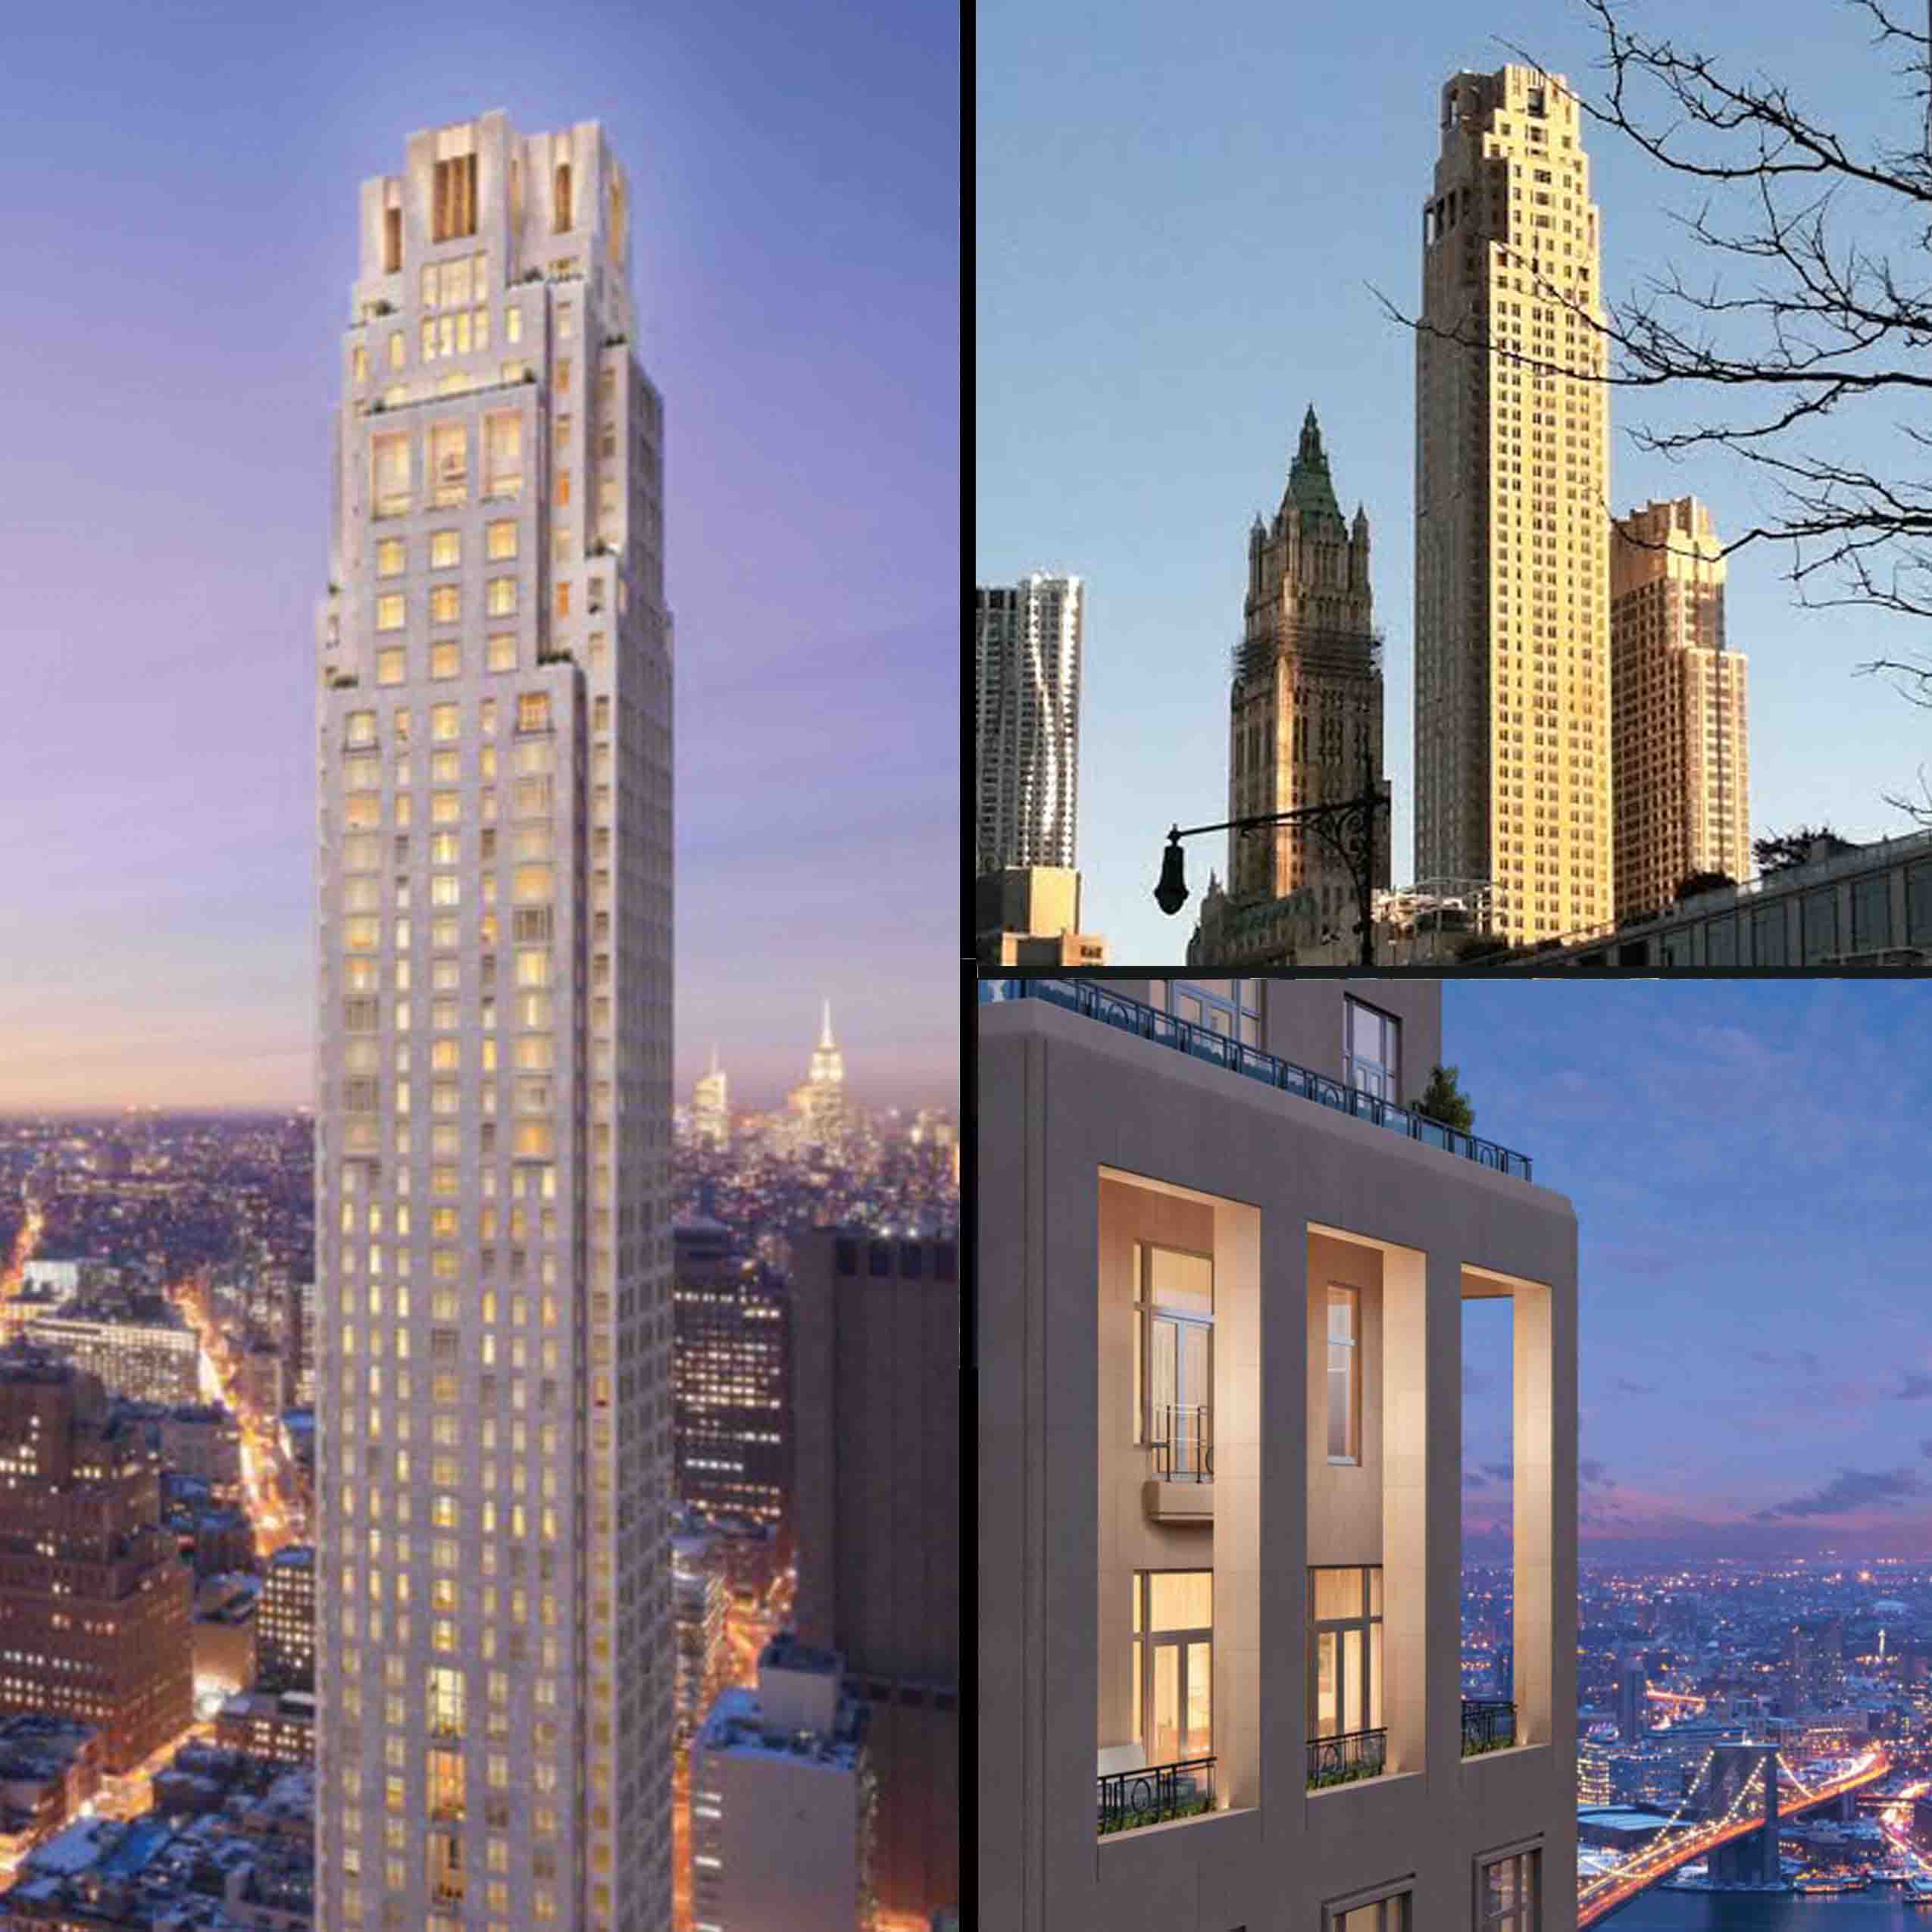 30 park place, robert a.m. stern, ramsa, robert stern, woolworth building, 15 central park west, four seasons, 30 park place rendering, 30 park place construction, 30 park place exterior, new york architecture, nyc skyscrapers, luxury residential, residential skyscraper, new york's super-slenders, slender skyscrapers